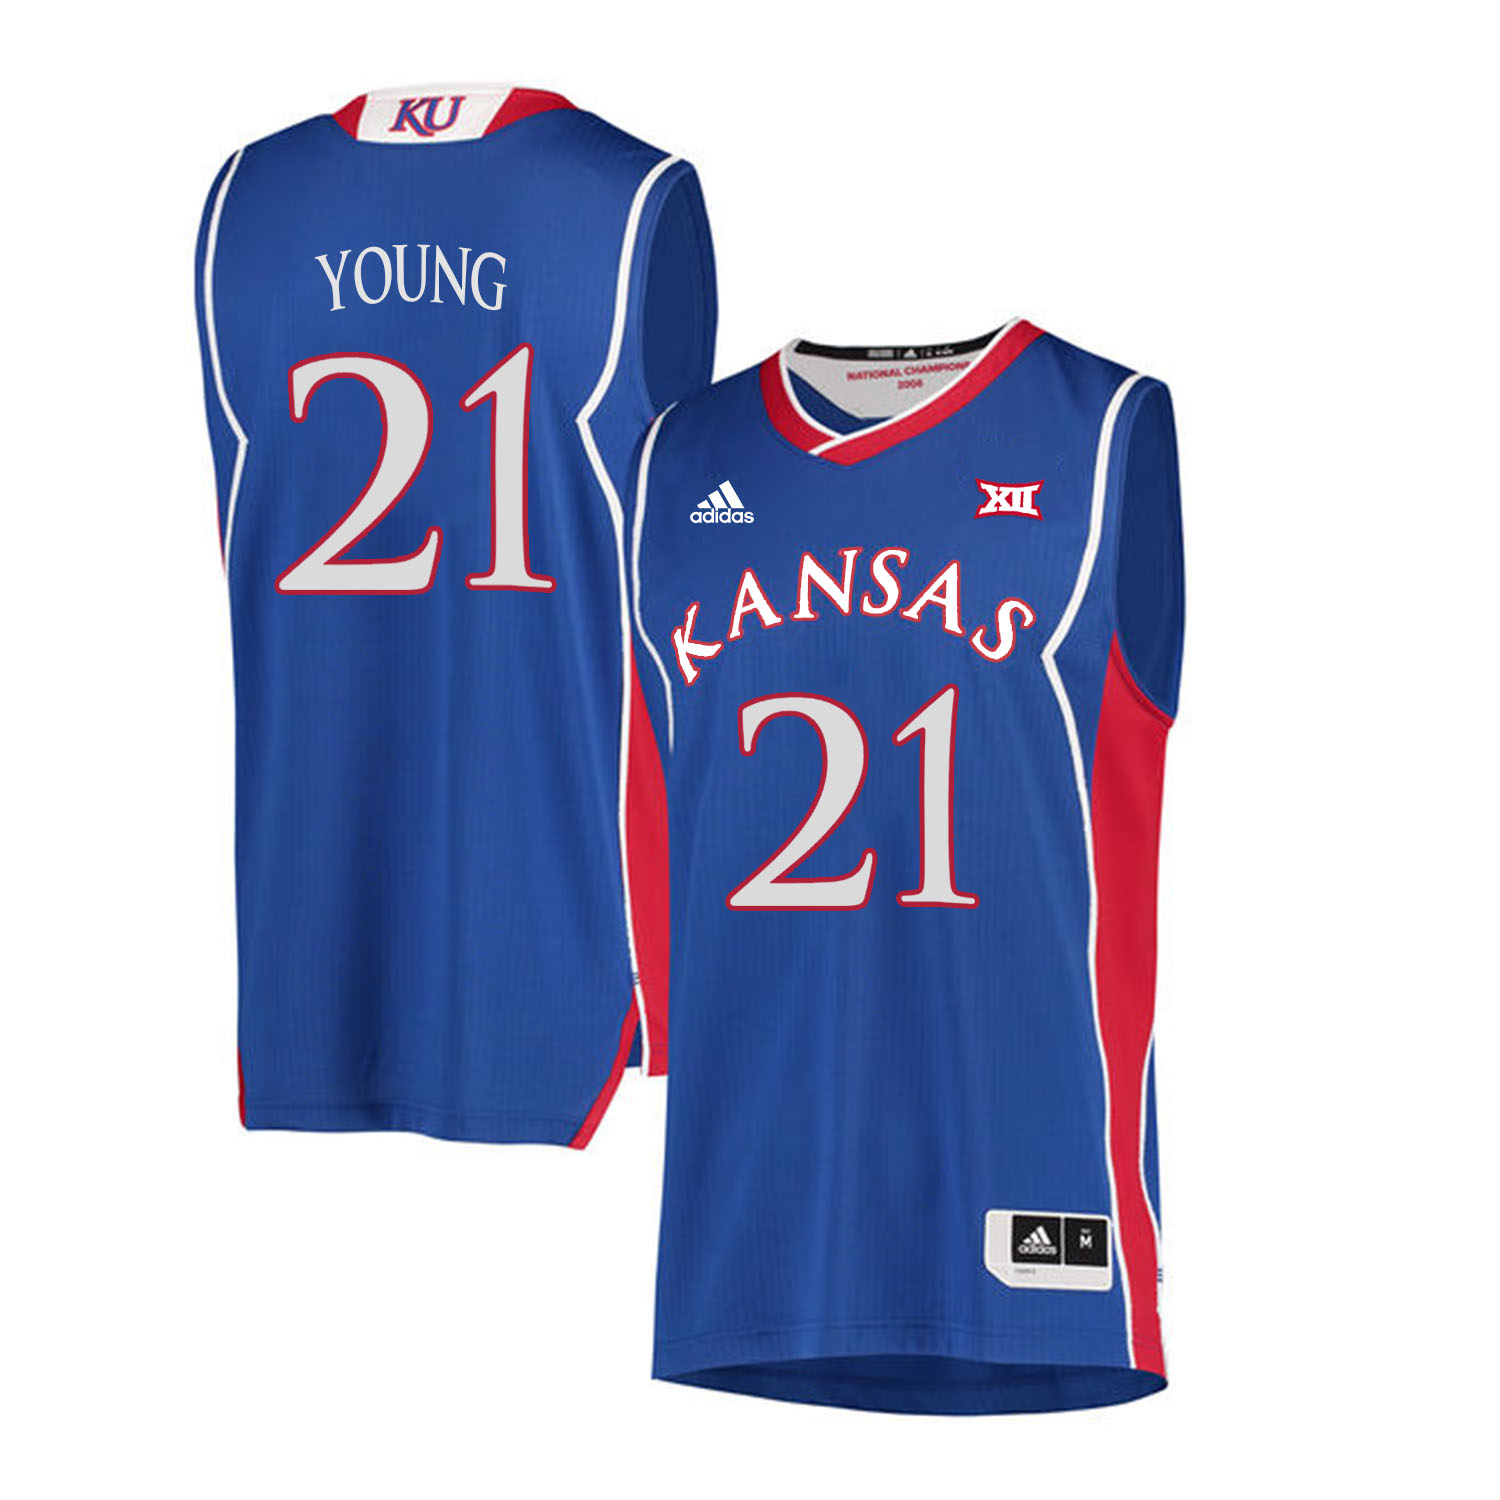 Kansas Jayhawks 21 Clay Young Blue Throwback College Basketball Jersey